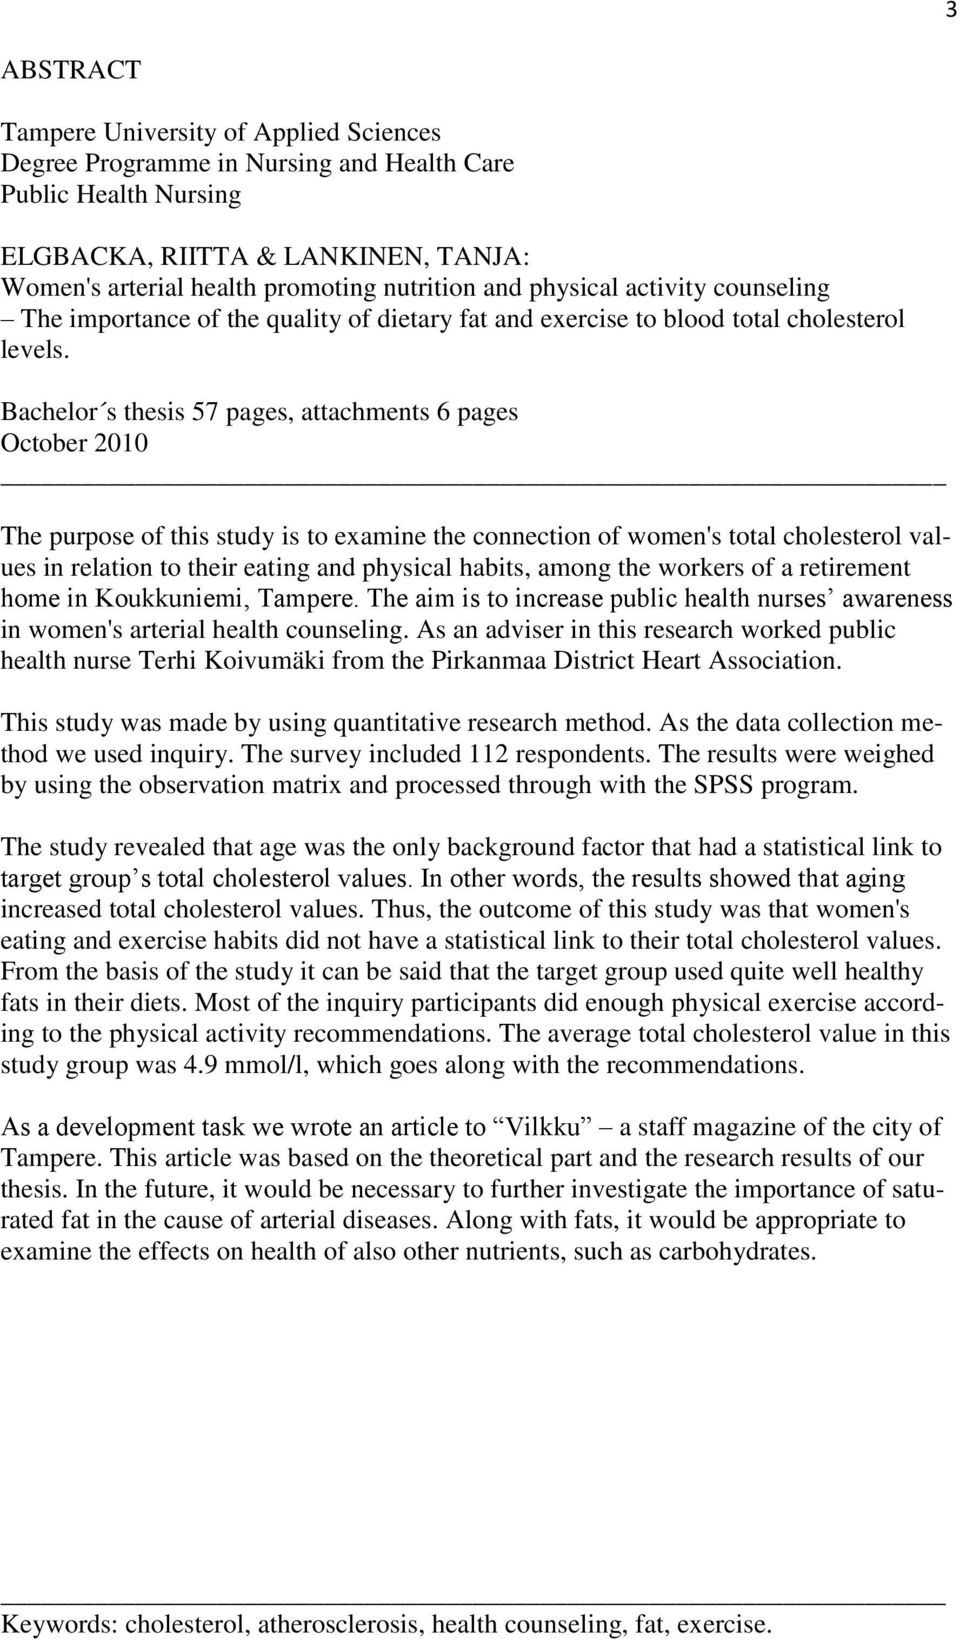 Bachelor s thesis 57 pages, attachments 6 pages October 2010 The purpose of this study is to examine the connection of women's total cholesterol values in relation to their eating and physical